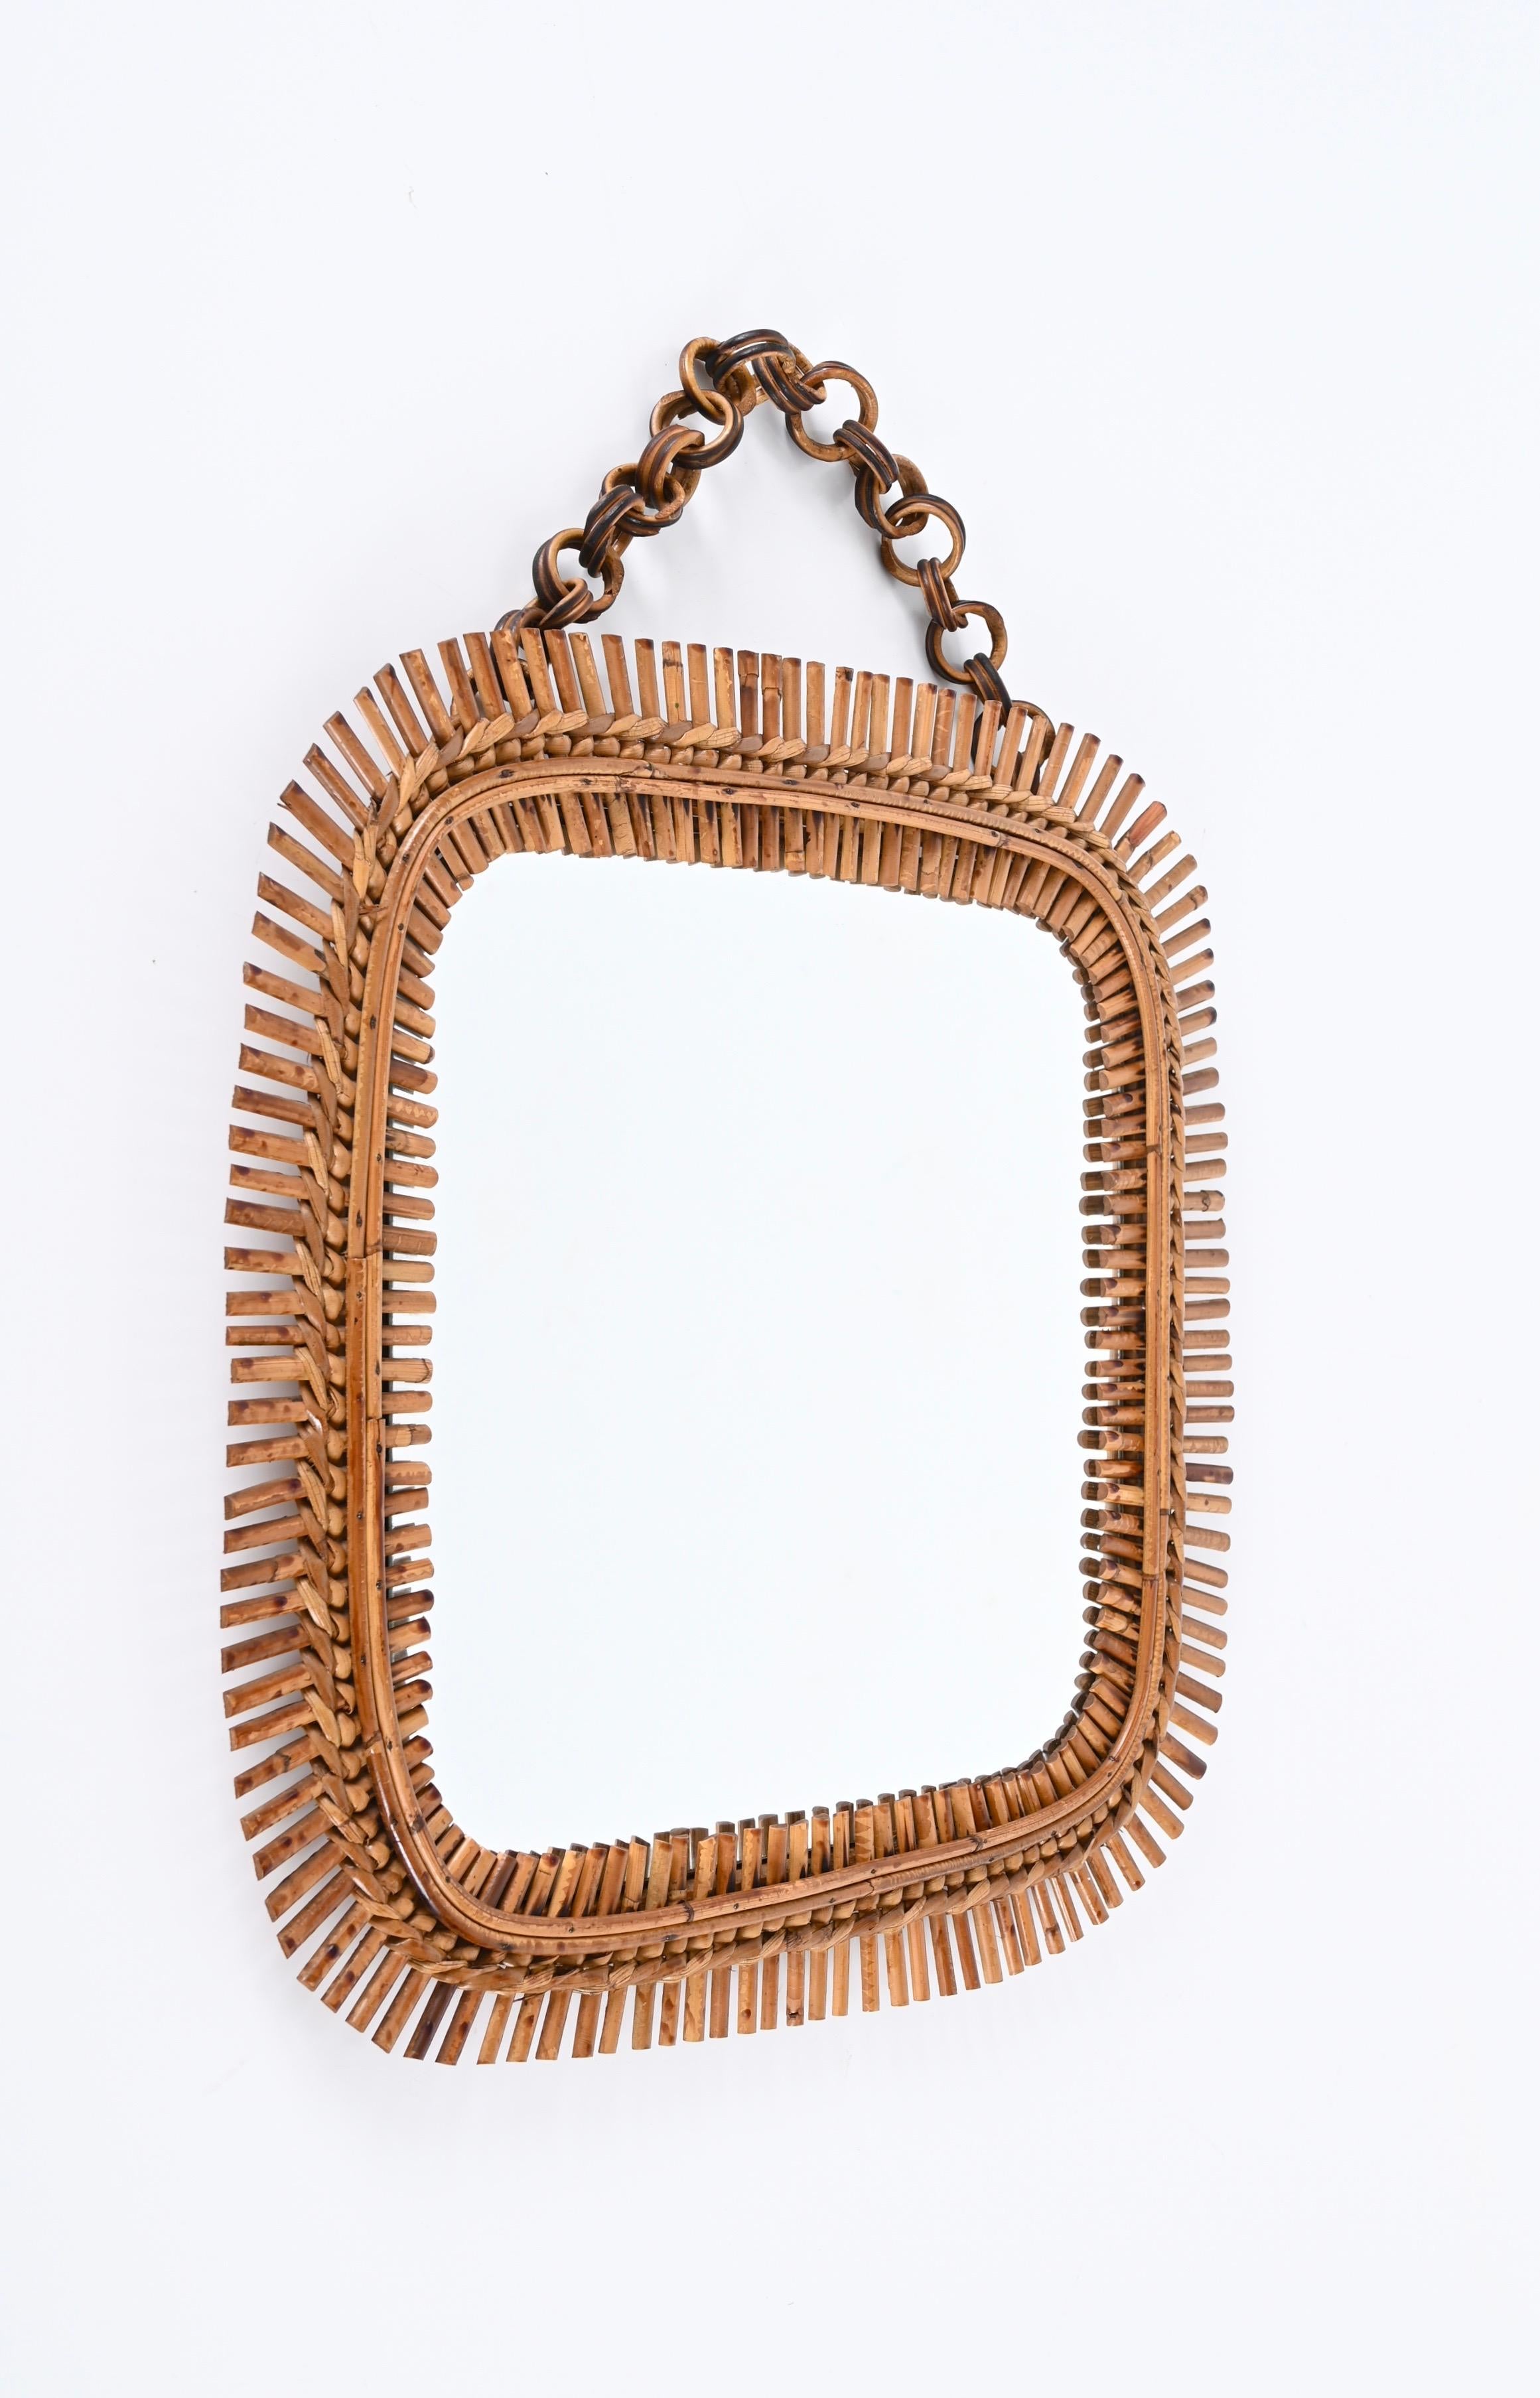 Fantastic square wall mirror in bamboo, rattan and wicker, made in Italy the 1960s and attributed to the mastery of Franco Albini.

This lovely mirror features a stunning square-shaped double frame in curved rattan crossed by small bamboo inserts,